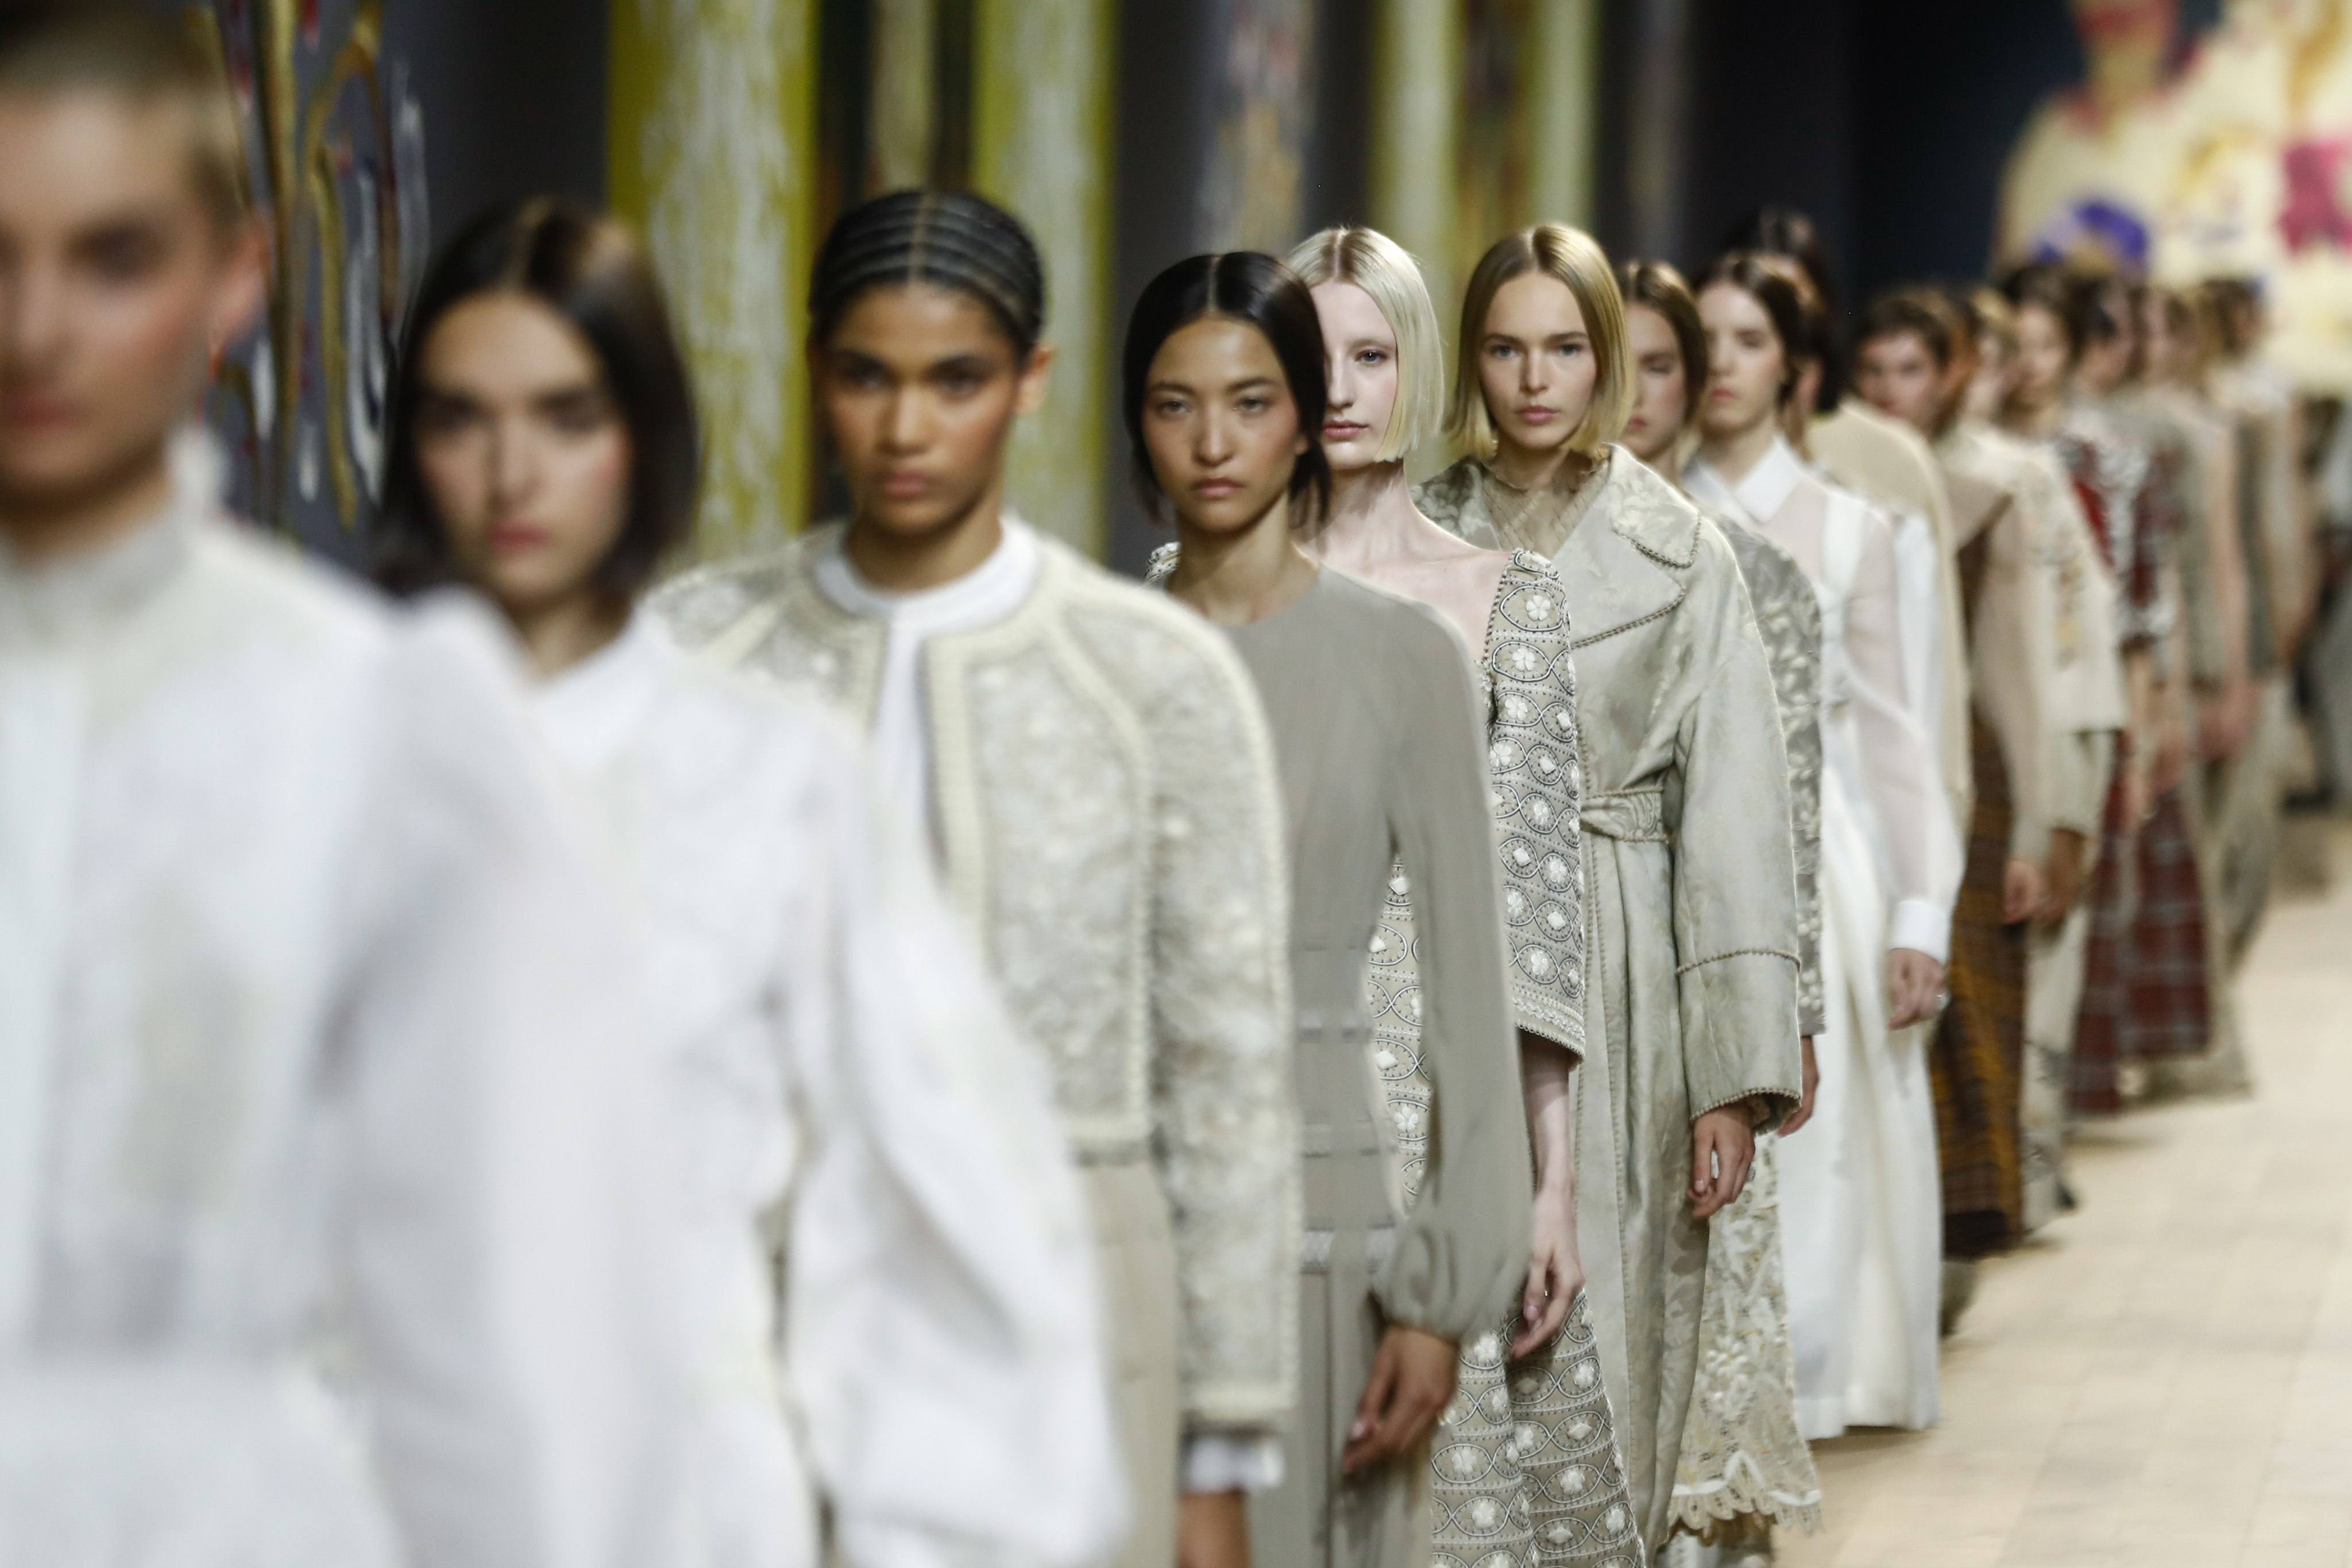 Paris Haute Couture Week: Dior paid homage to Ukraine with an